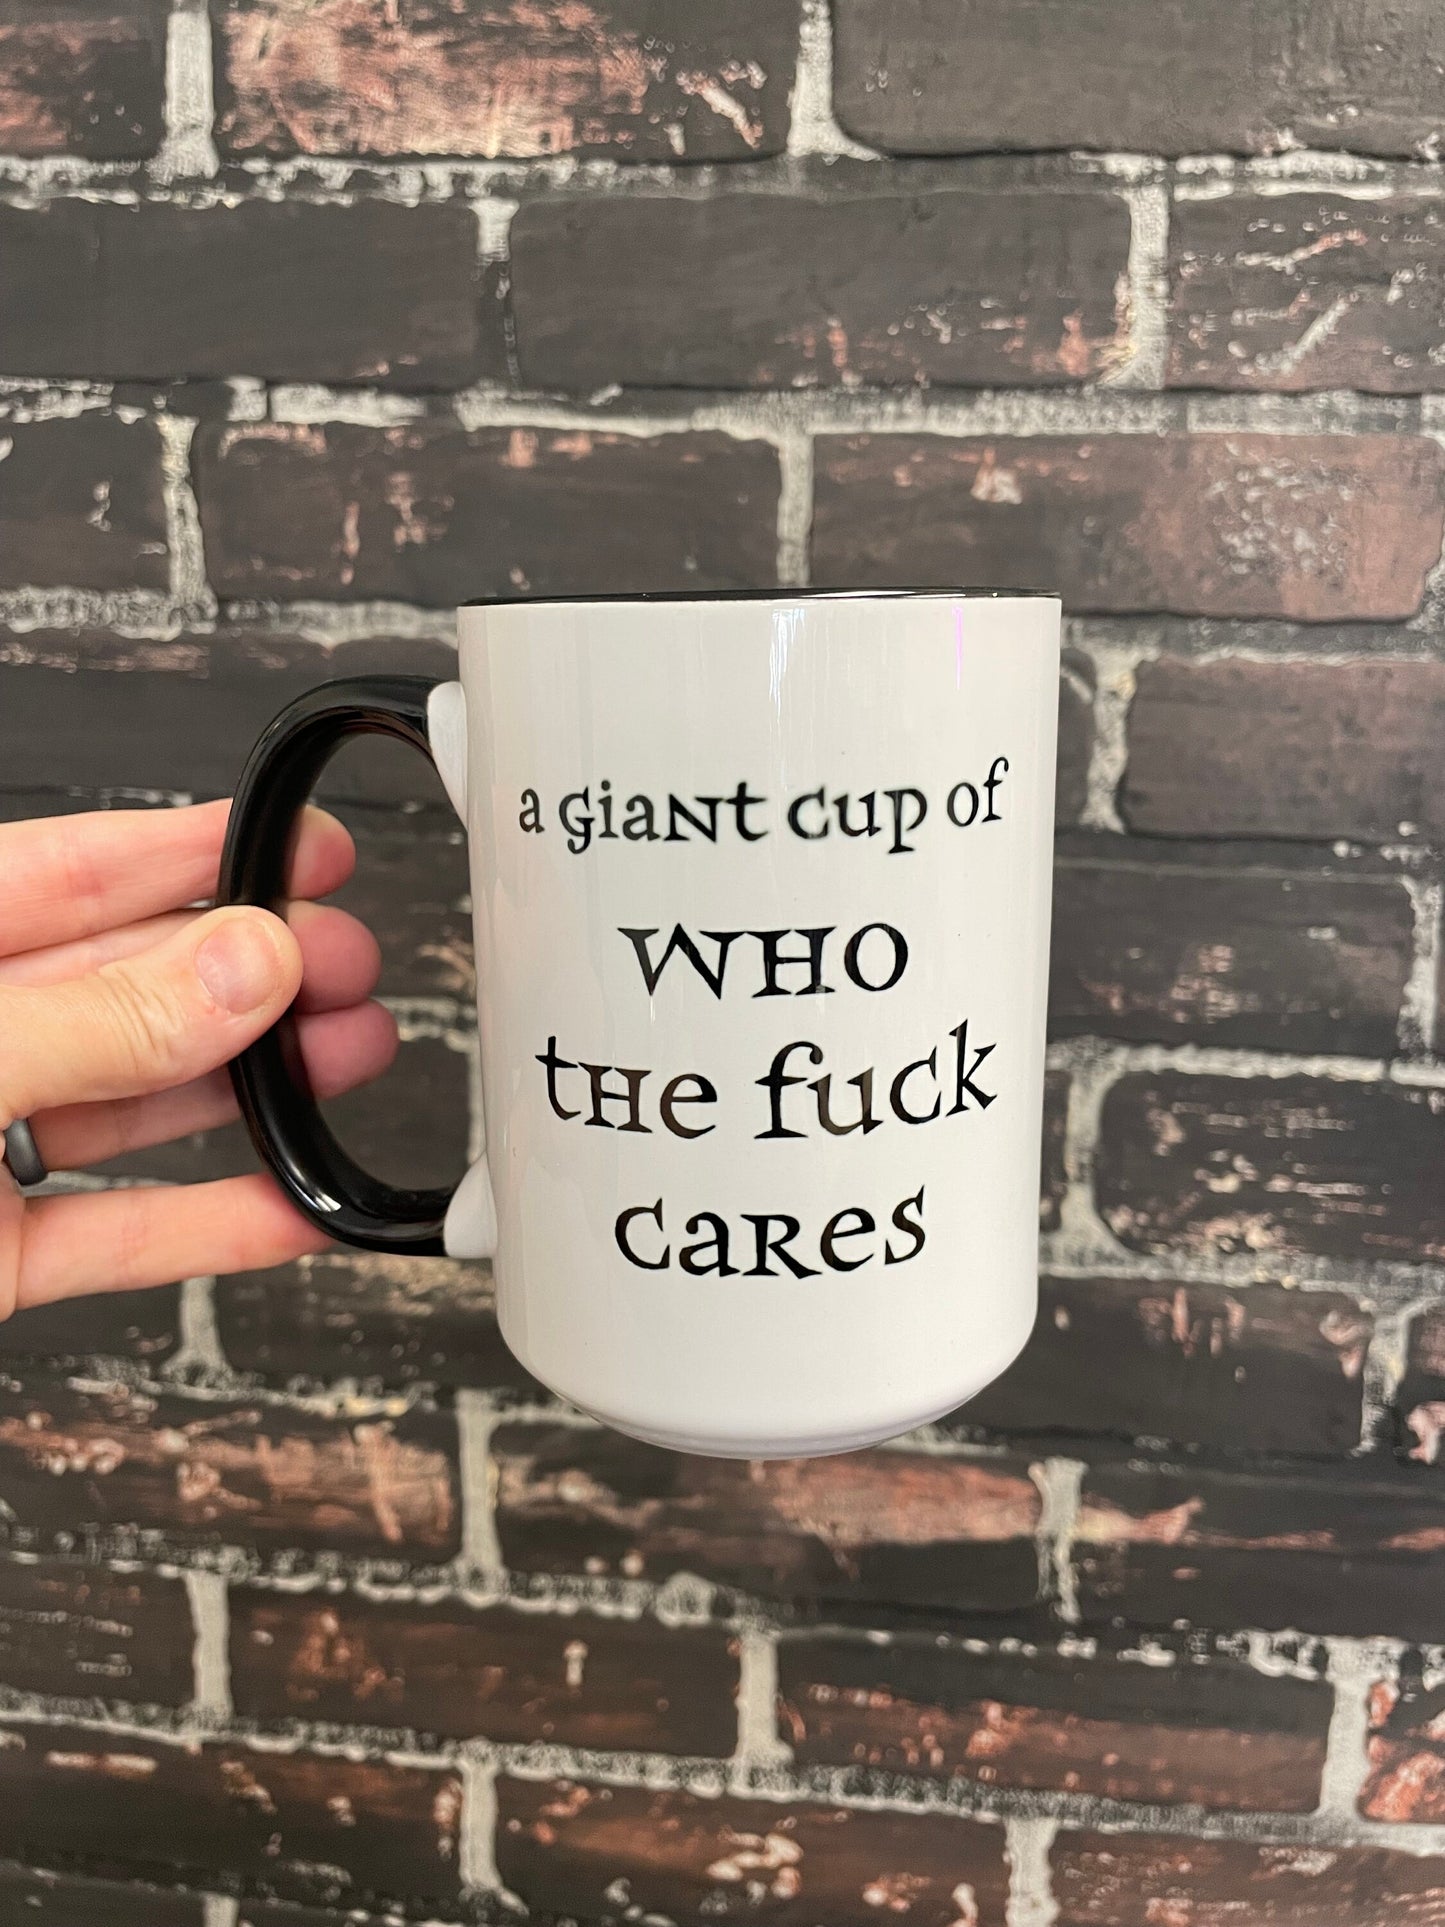 A giant cup of who the fuck cares, Double sided 15oz dishwasher safe Coffee Mug